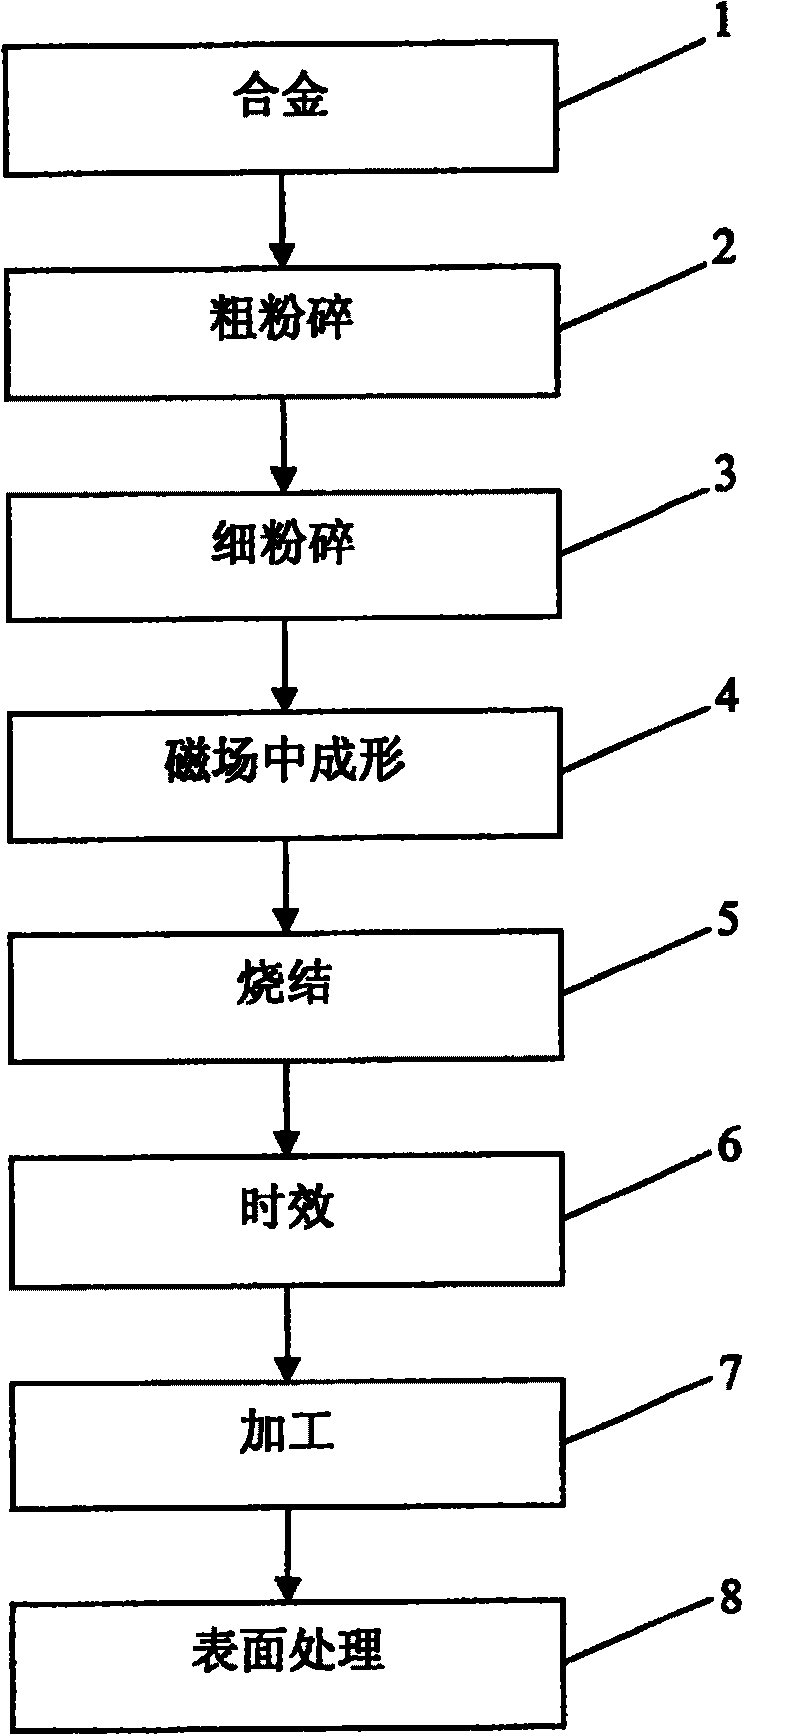 Method and device for producing alloy powder for permanent magnet